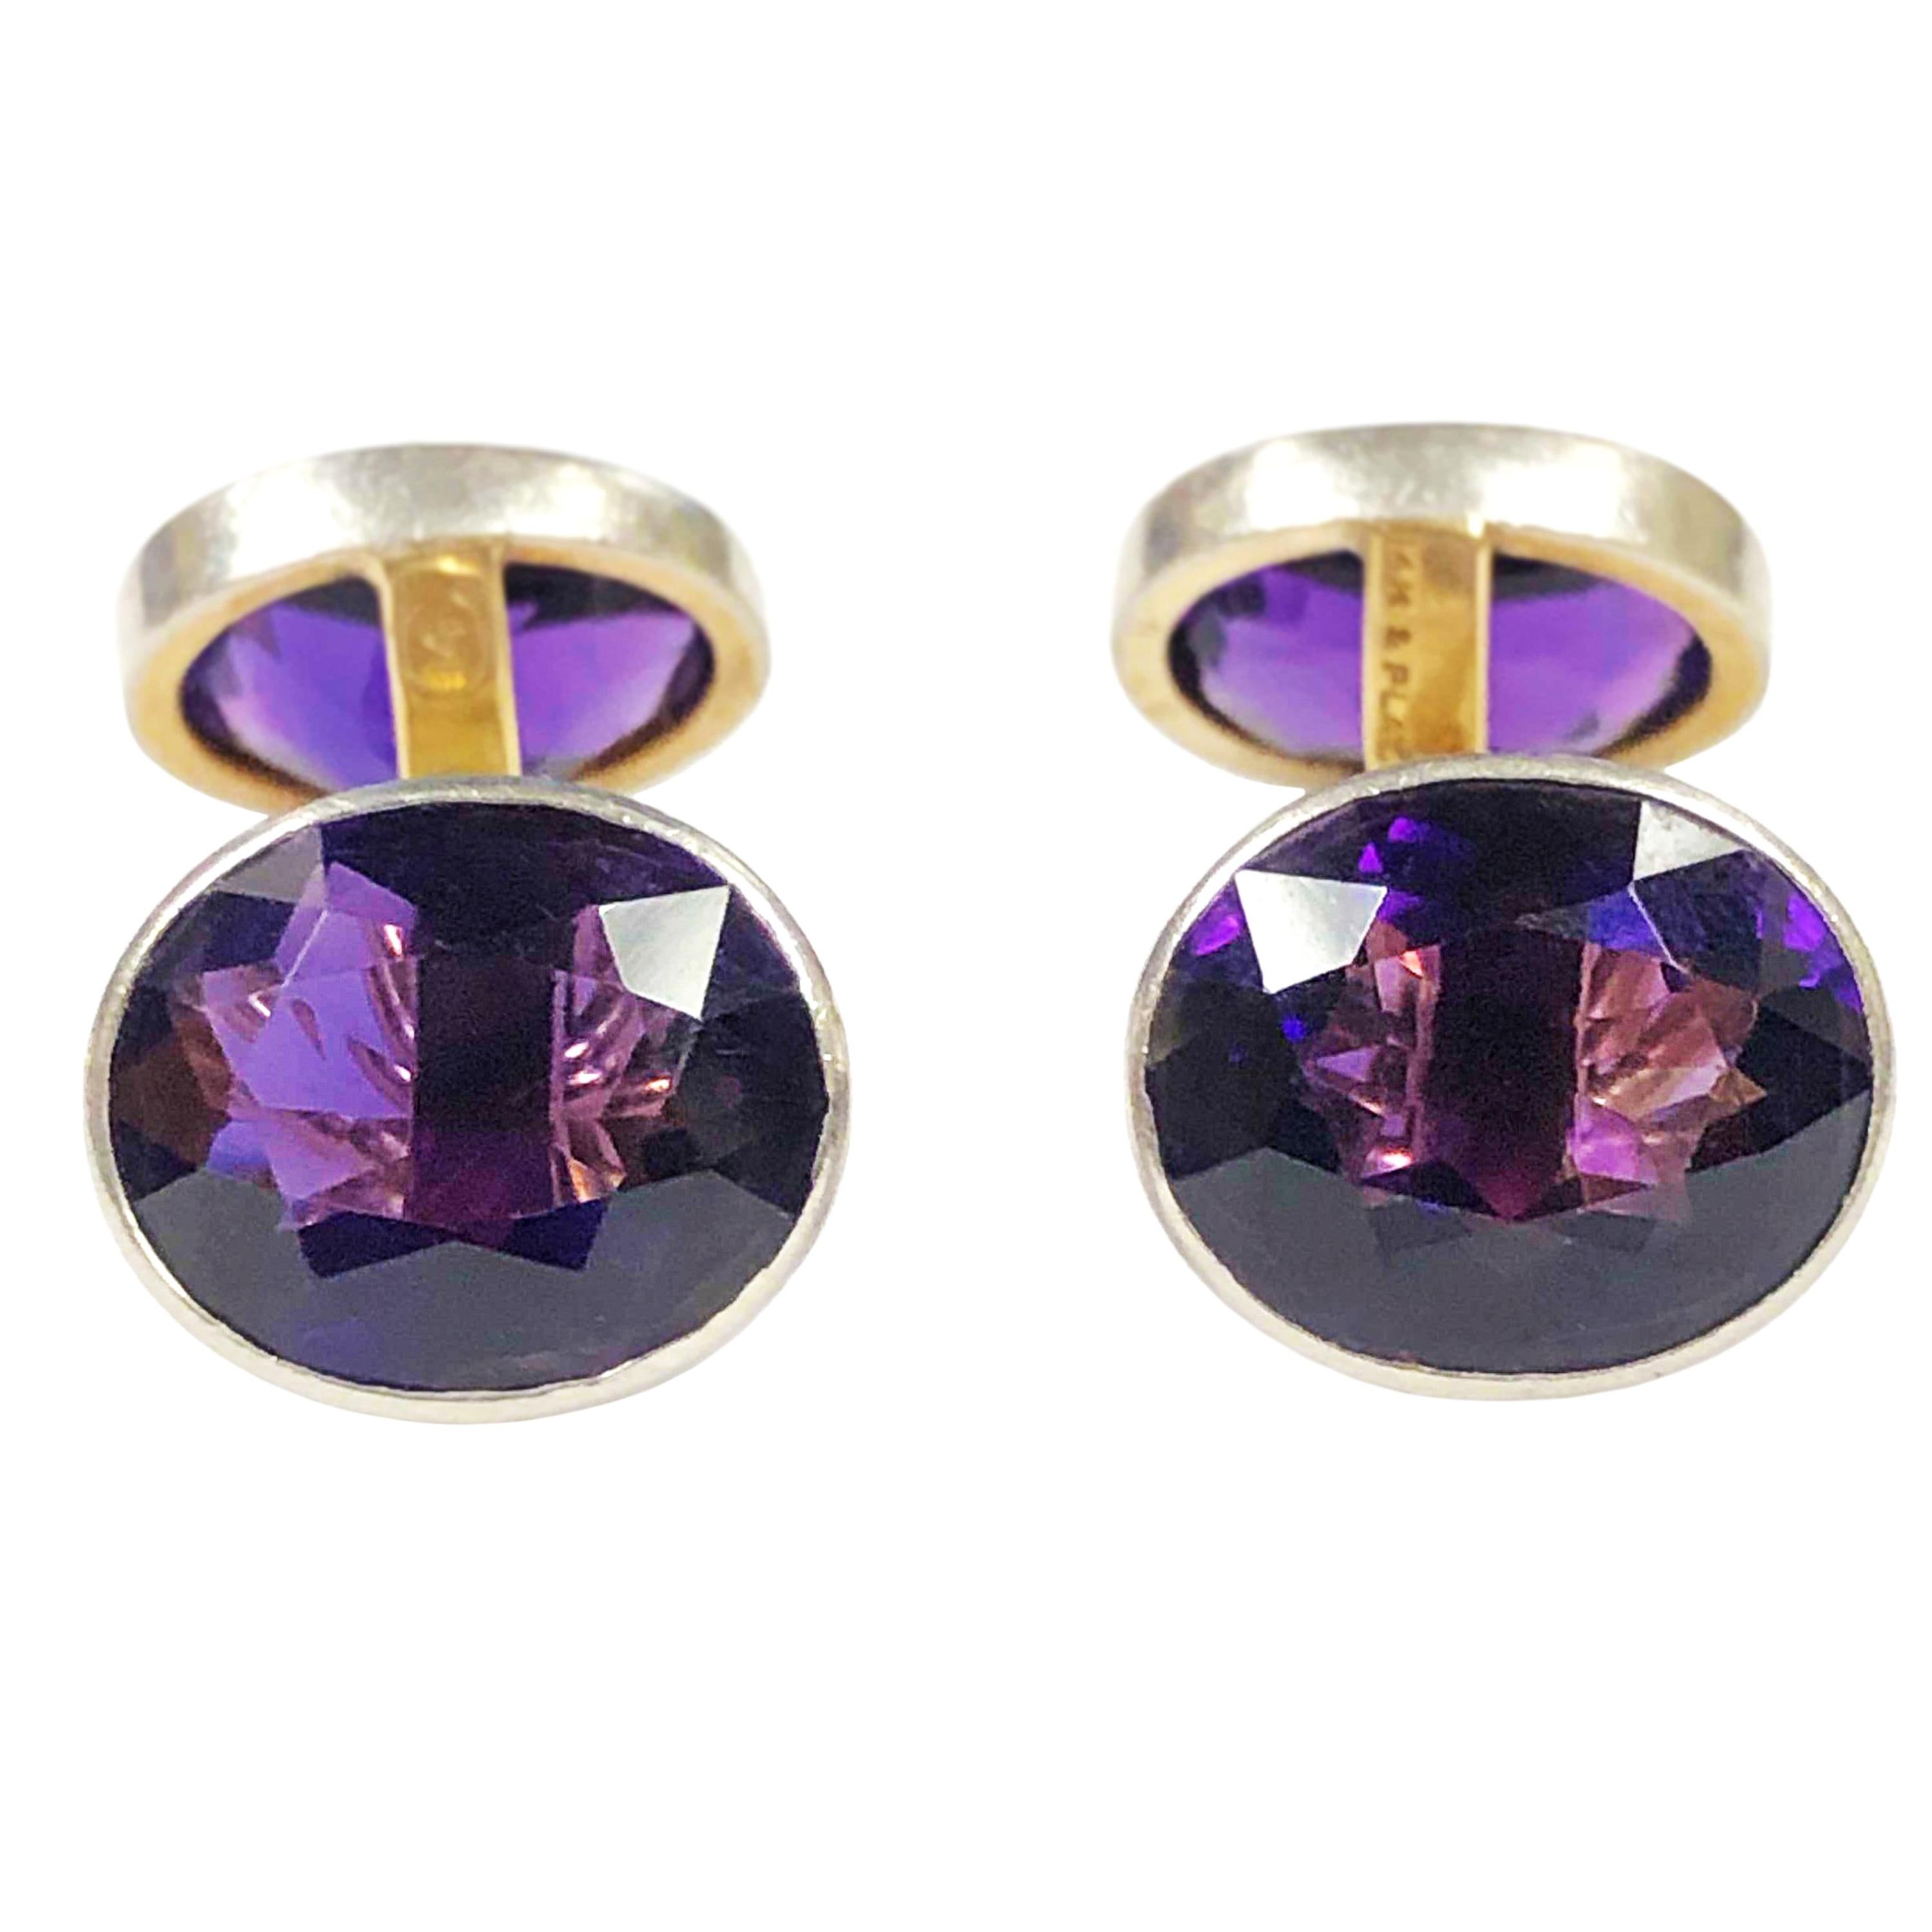 Antique Black Star and Frost Platinum Gold and Amethyst Cufflinks